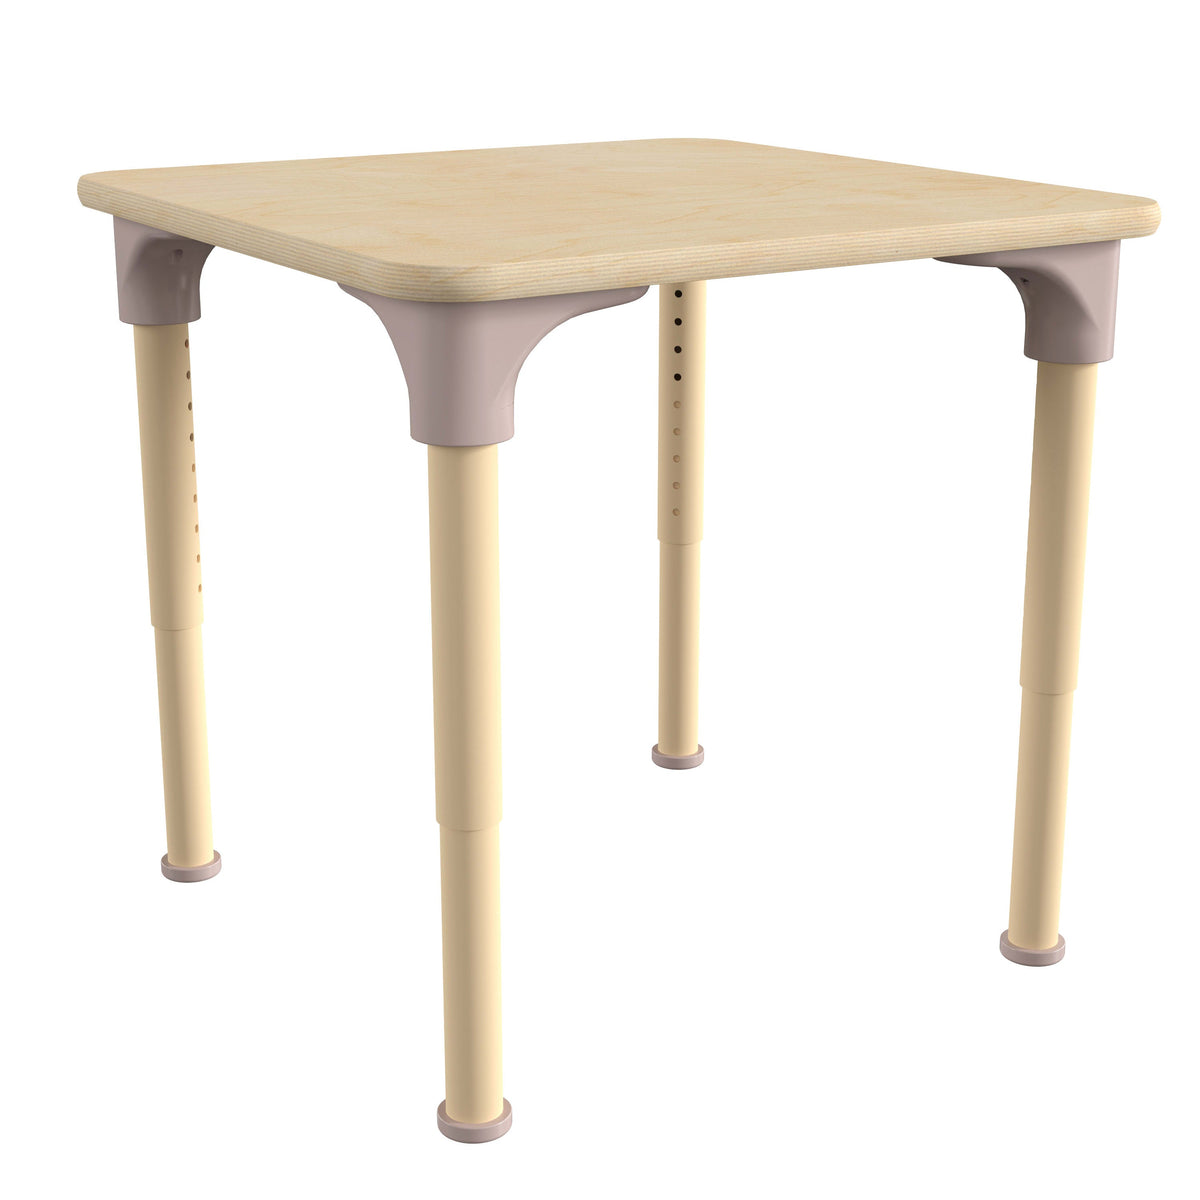 Commercial Grade Adjustable Height Square Wooden Classroom Table - Beech